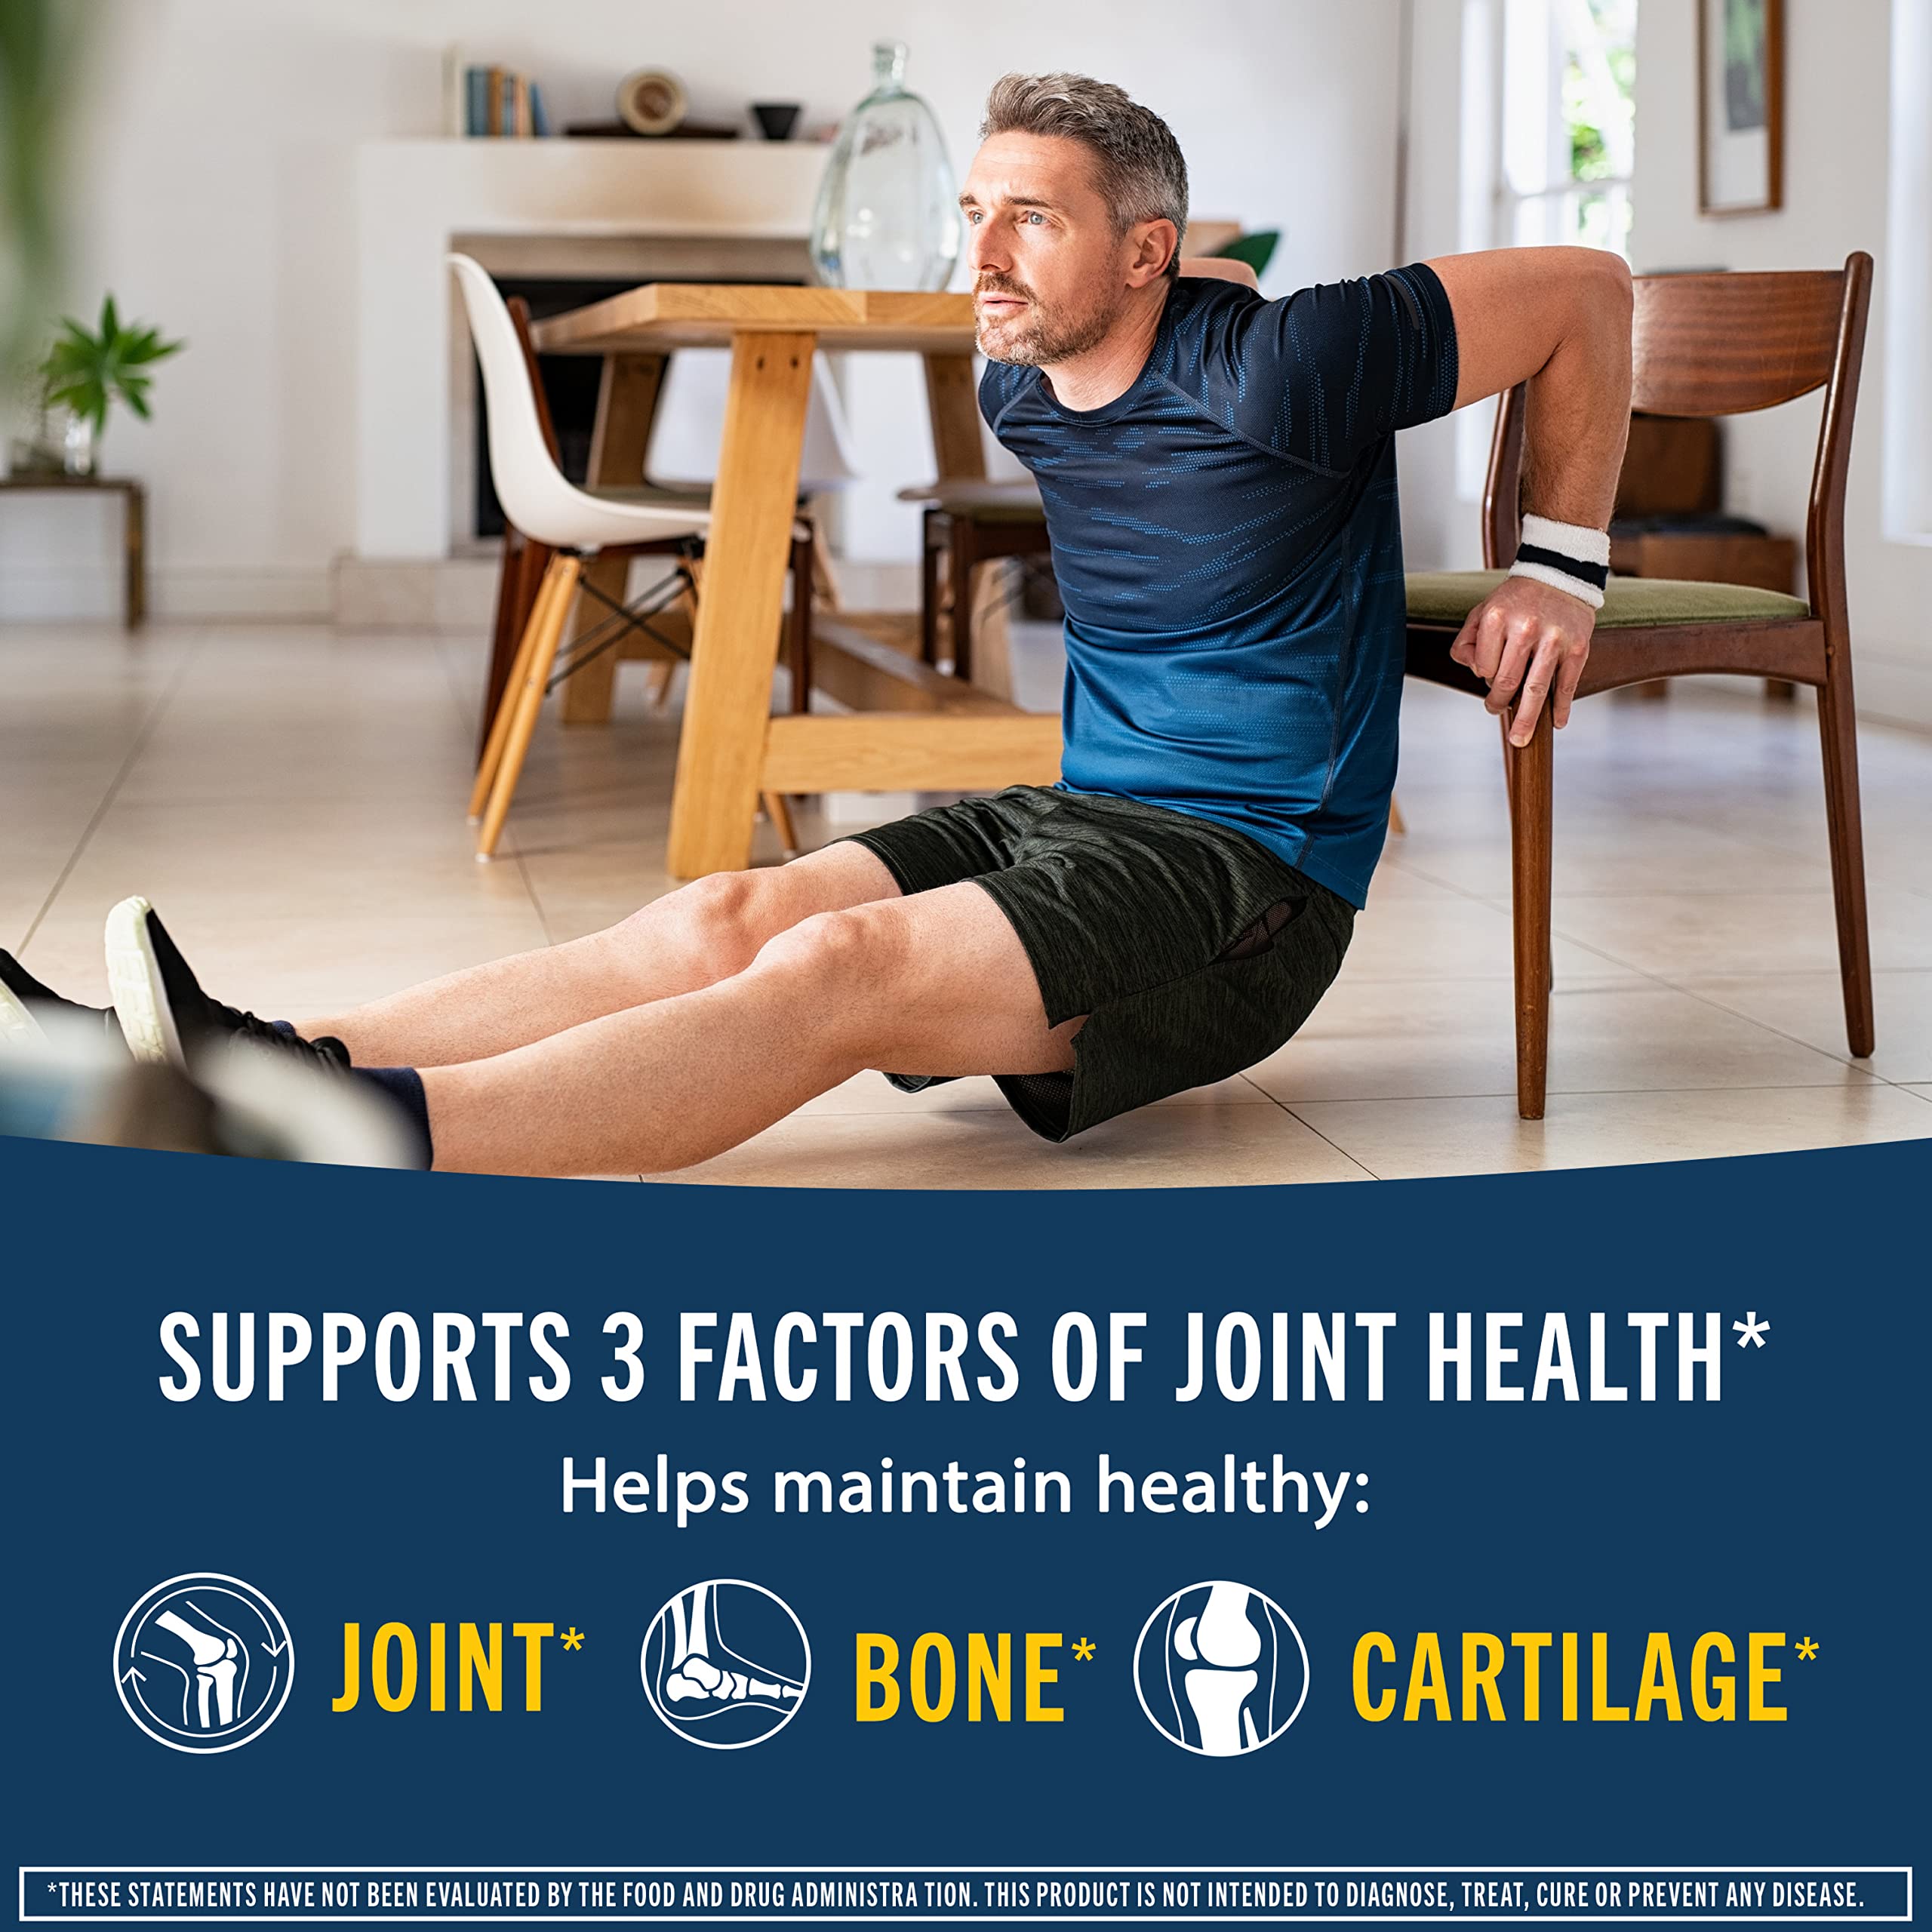 Move Free Ultra Triple Action Joint Support Supplement - Type II Collagen Boron & Hyaluronic Acid - Supports Joint Comfort, Cartiliage & Bones in 1 Tiny Pill Per Day, 2x30ct Bottles (60 servings)*